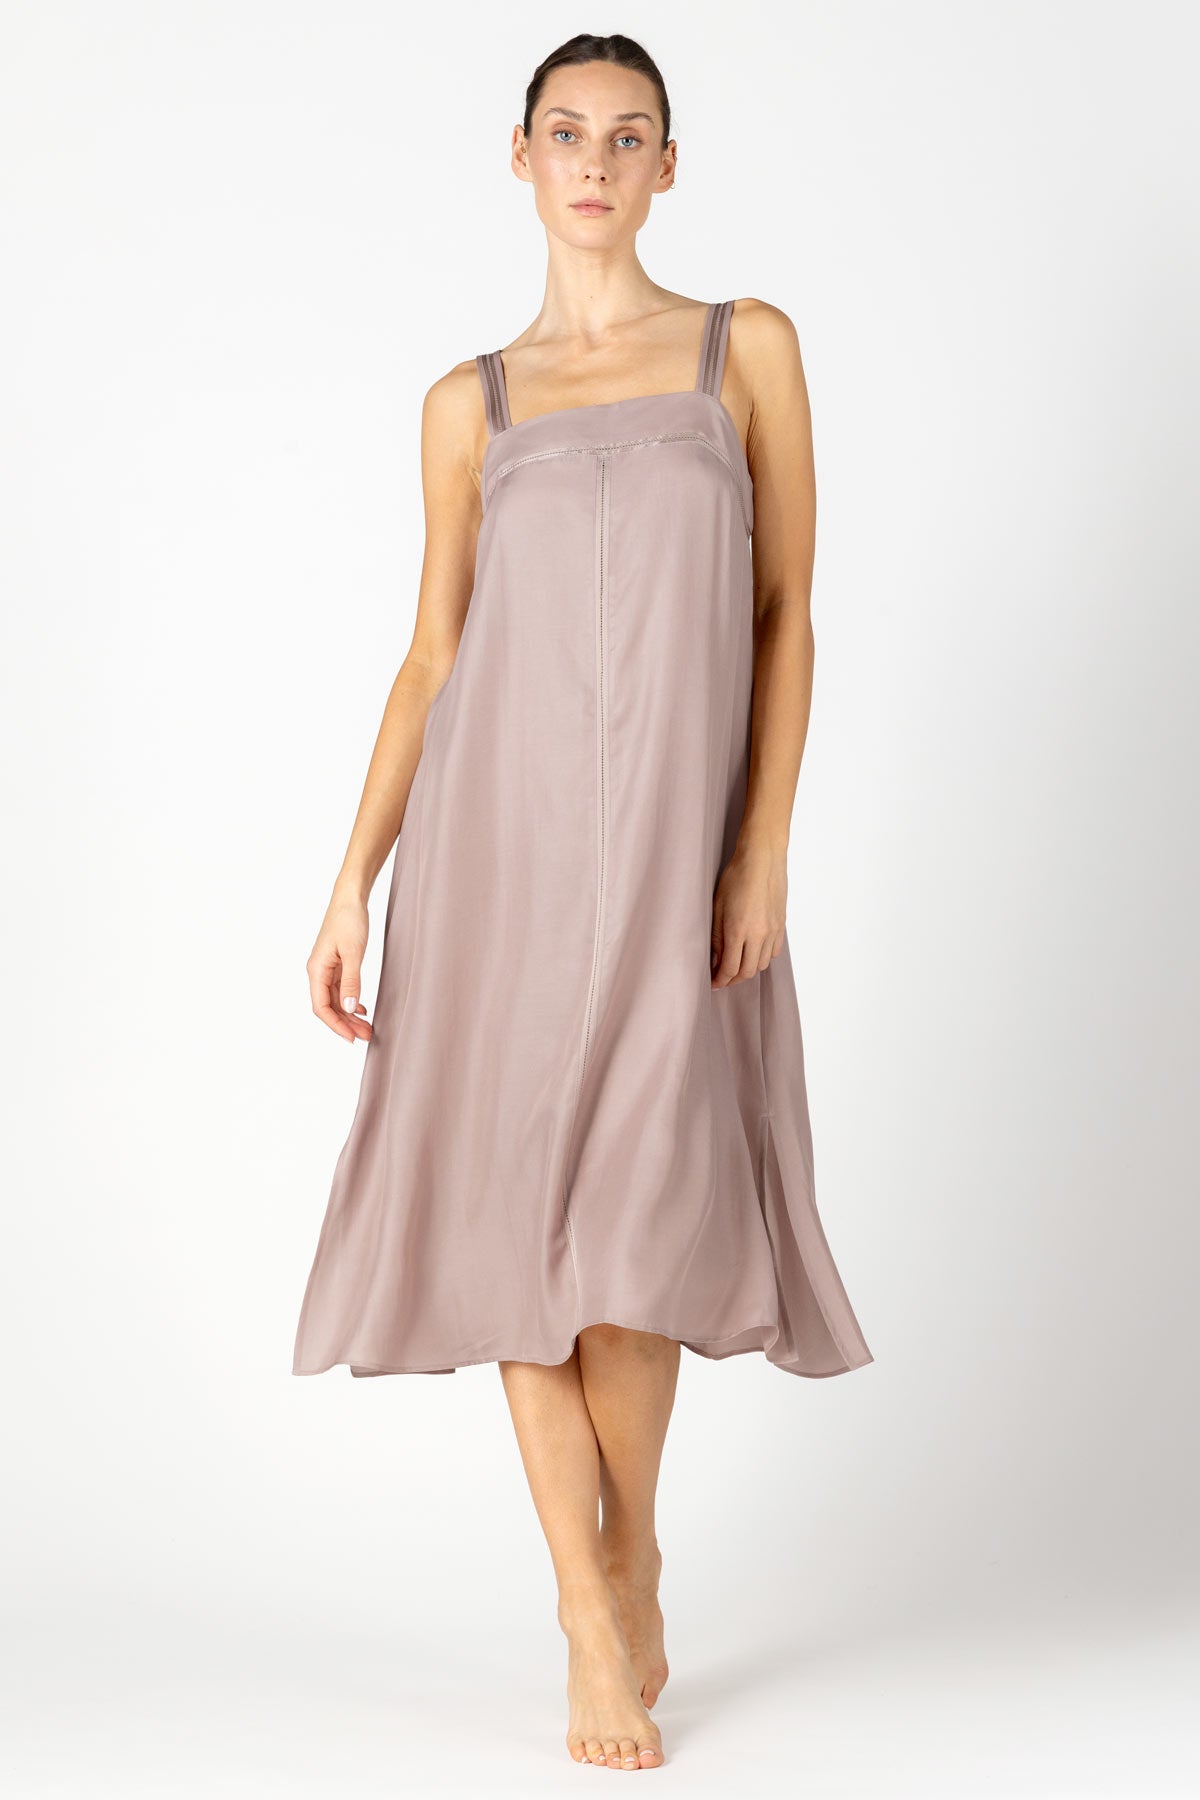 Kacey City Dress Long Gown NK iMODE Freckles Pink XS